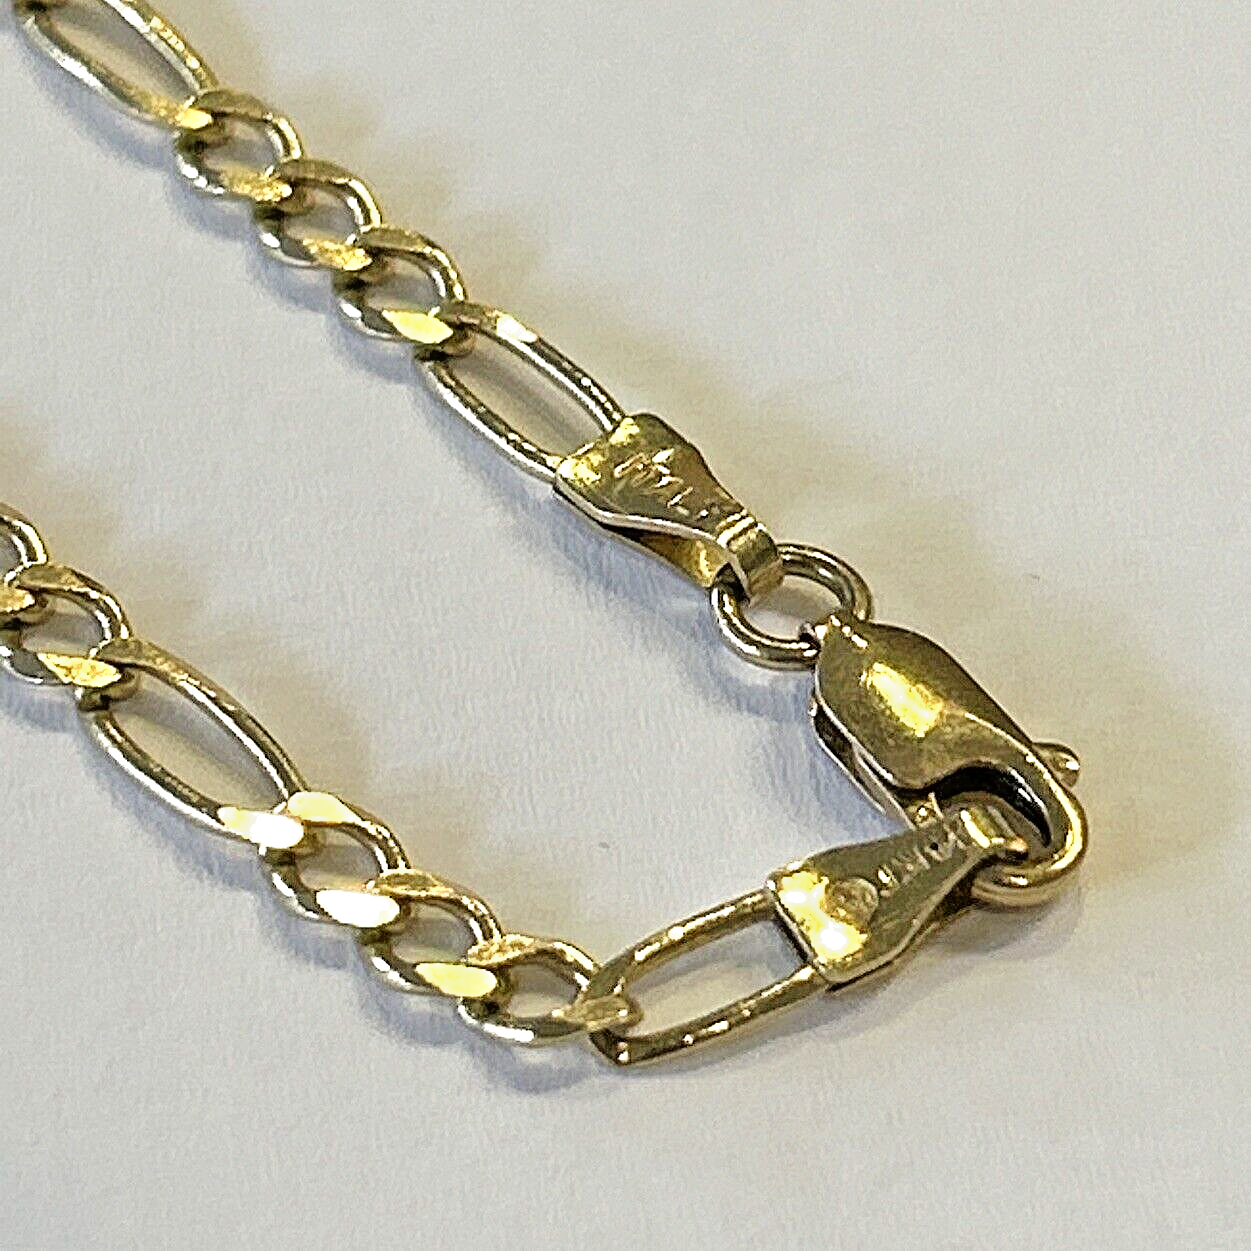 14k Gold Italy Figaro Link Chain 24" Inch - 10.1 grams - 3.3mm